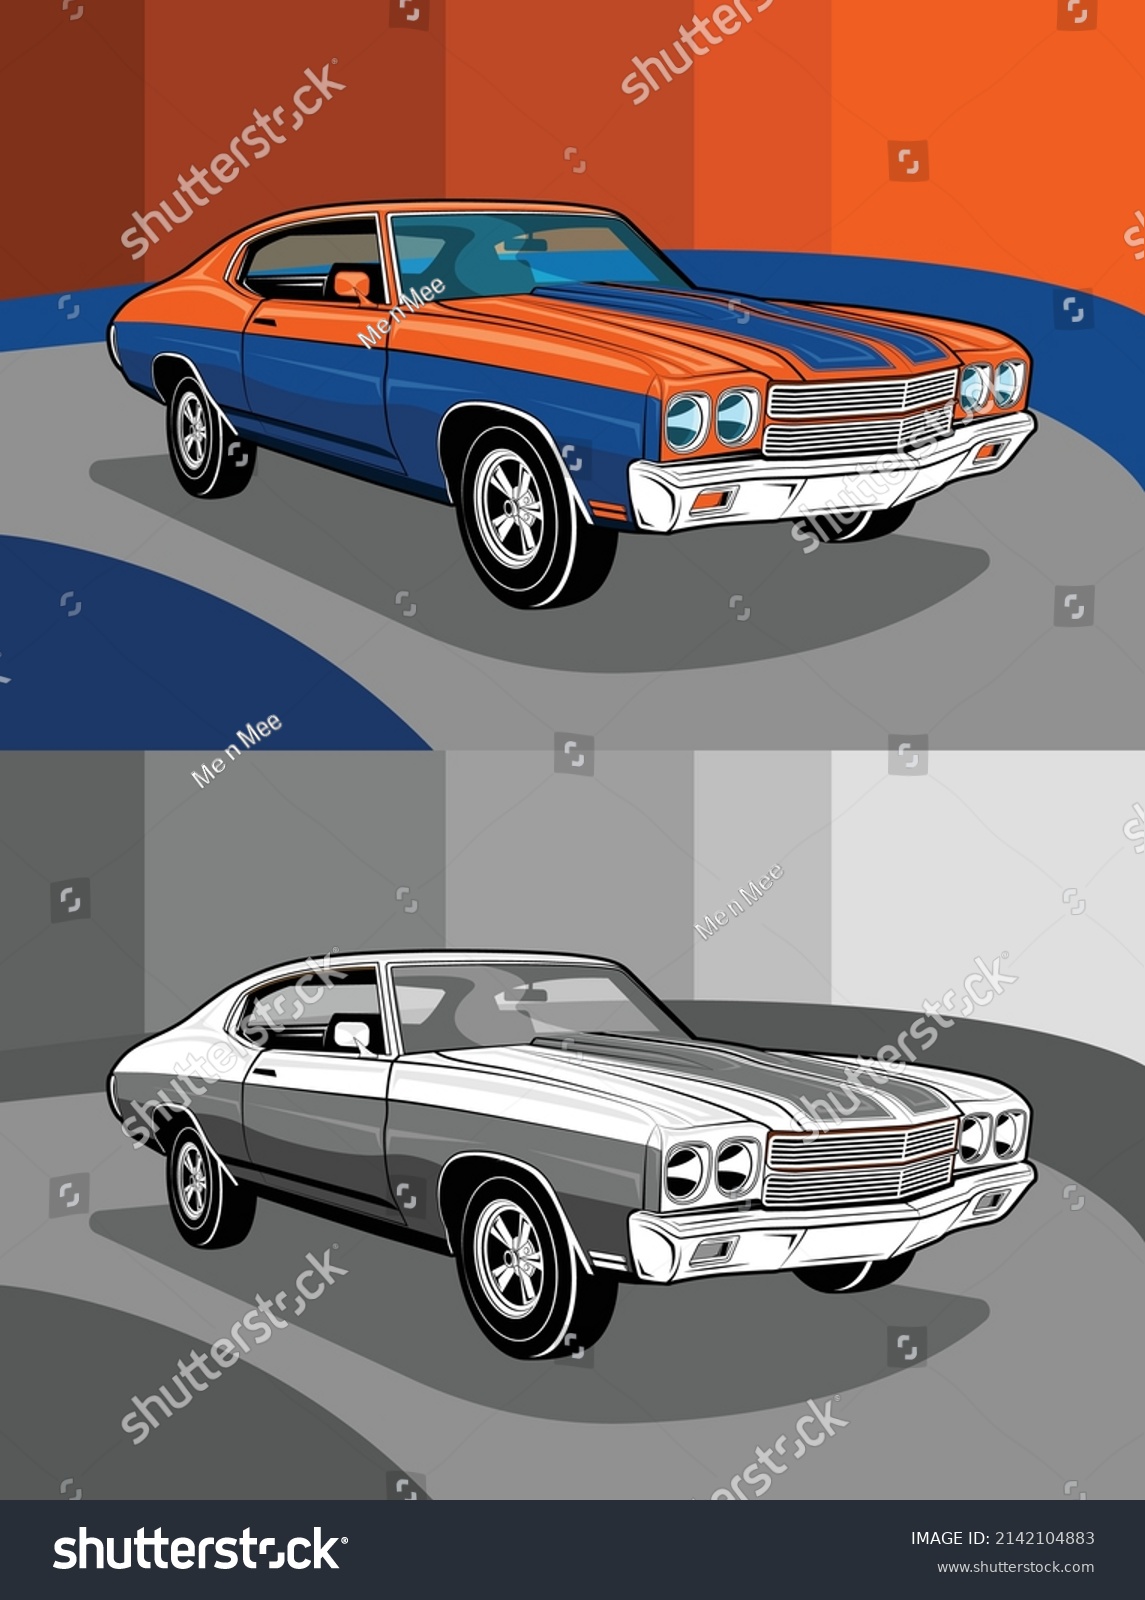 SVG of Vintage American Classic Muscle Cars Orange and Blue svg